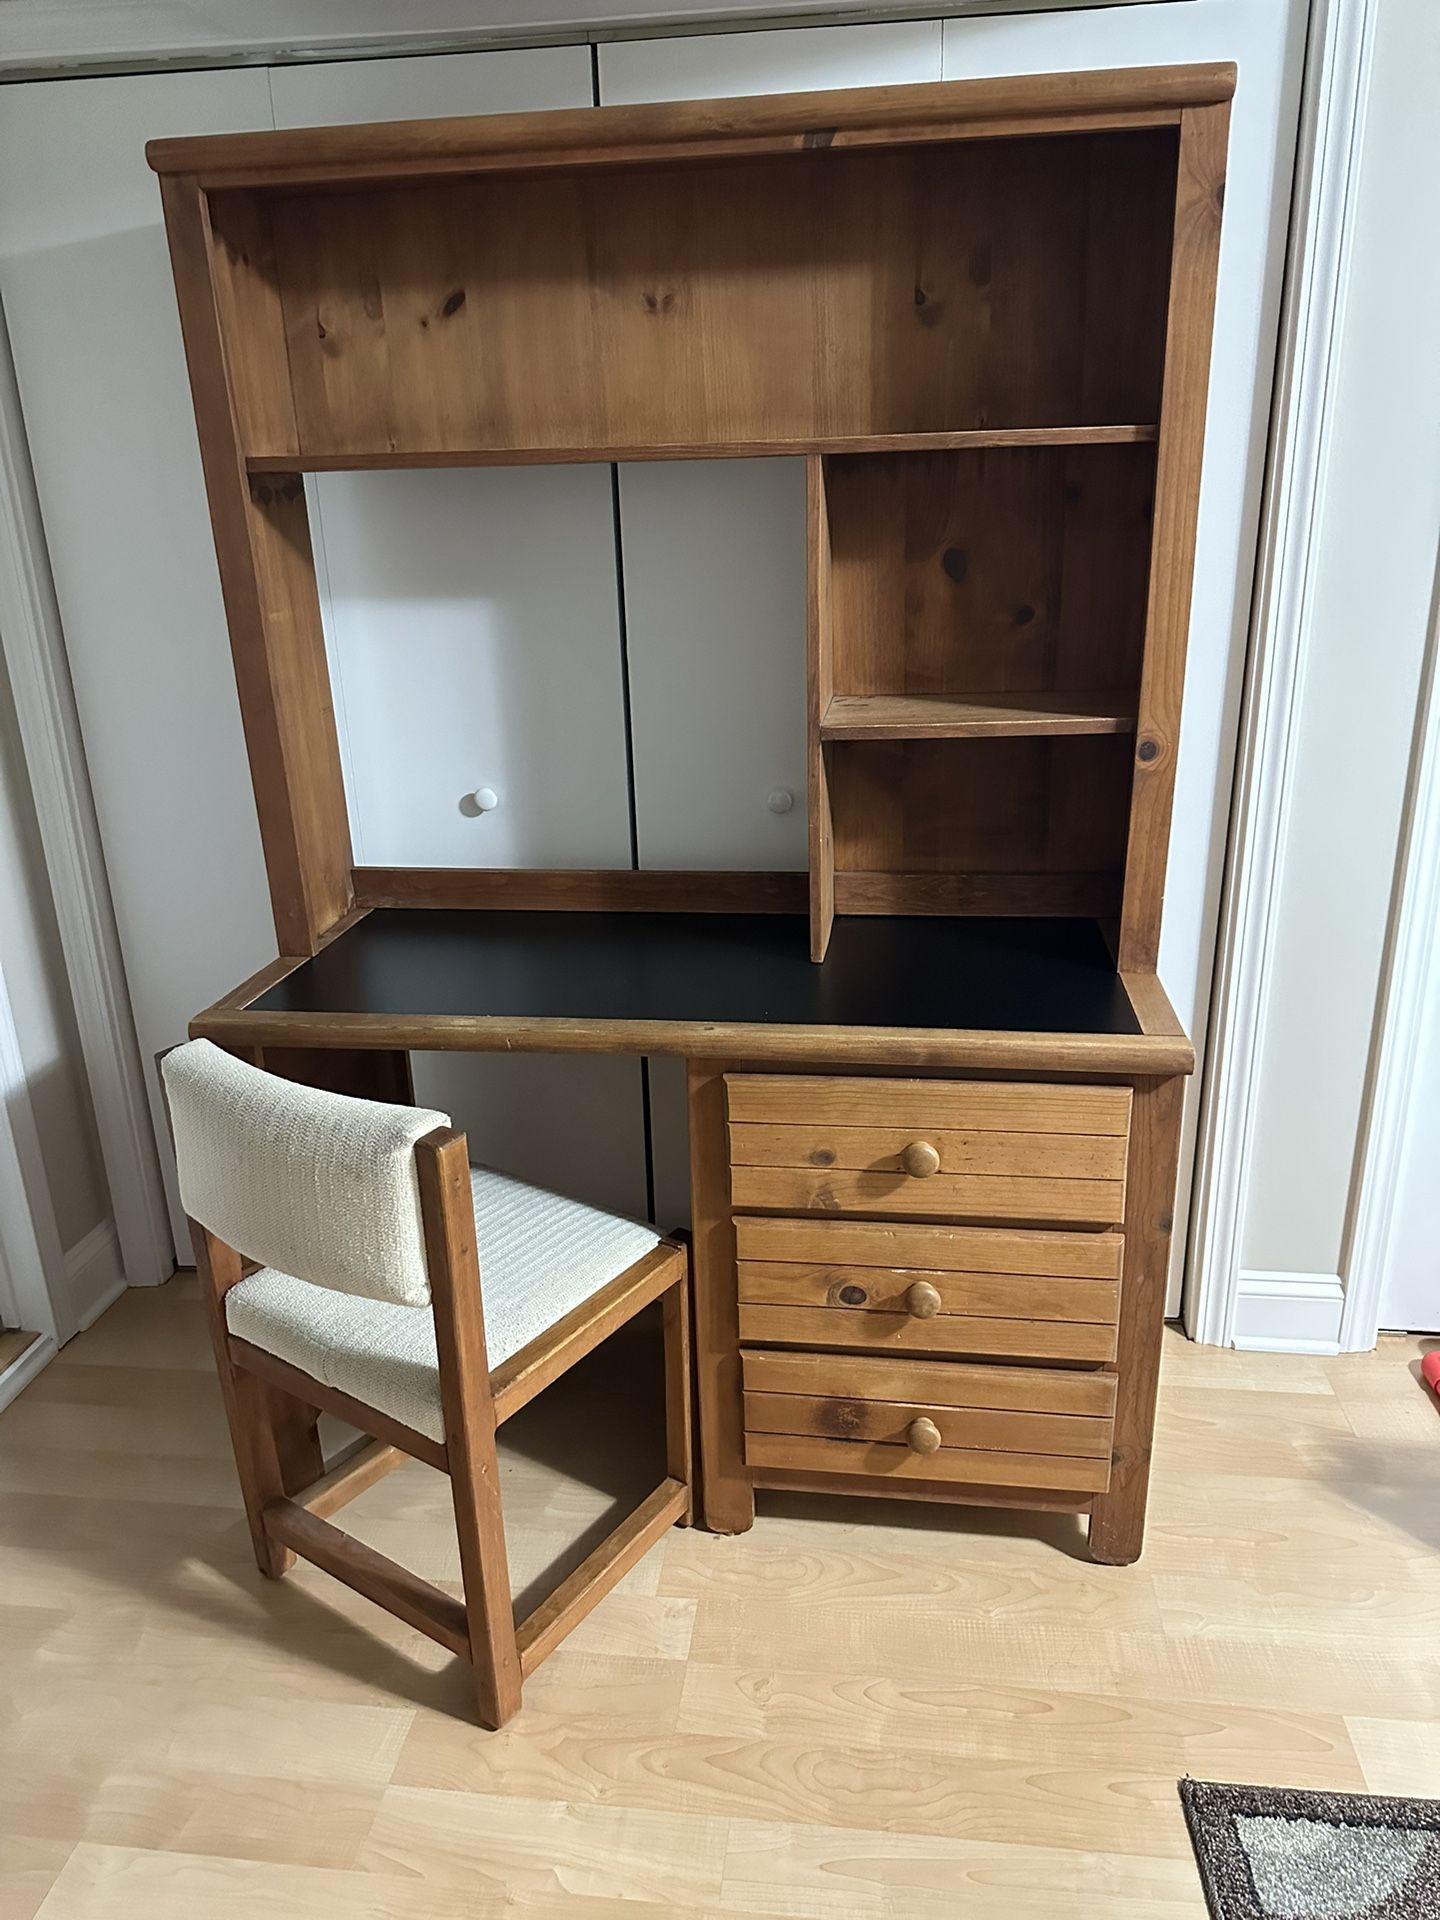  Twin Bed On Wheels w/ Desk and Chair